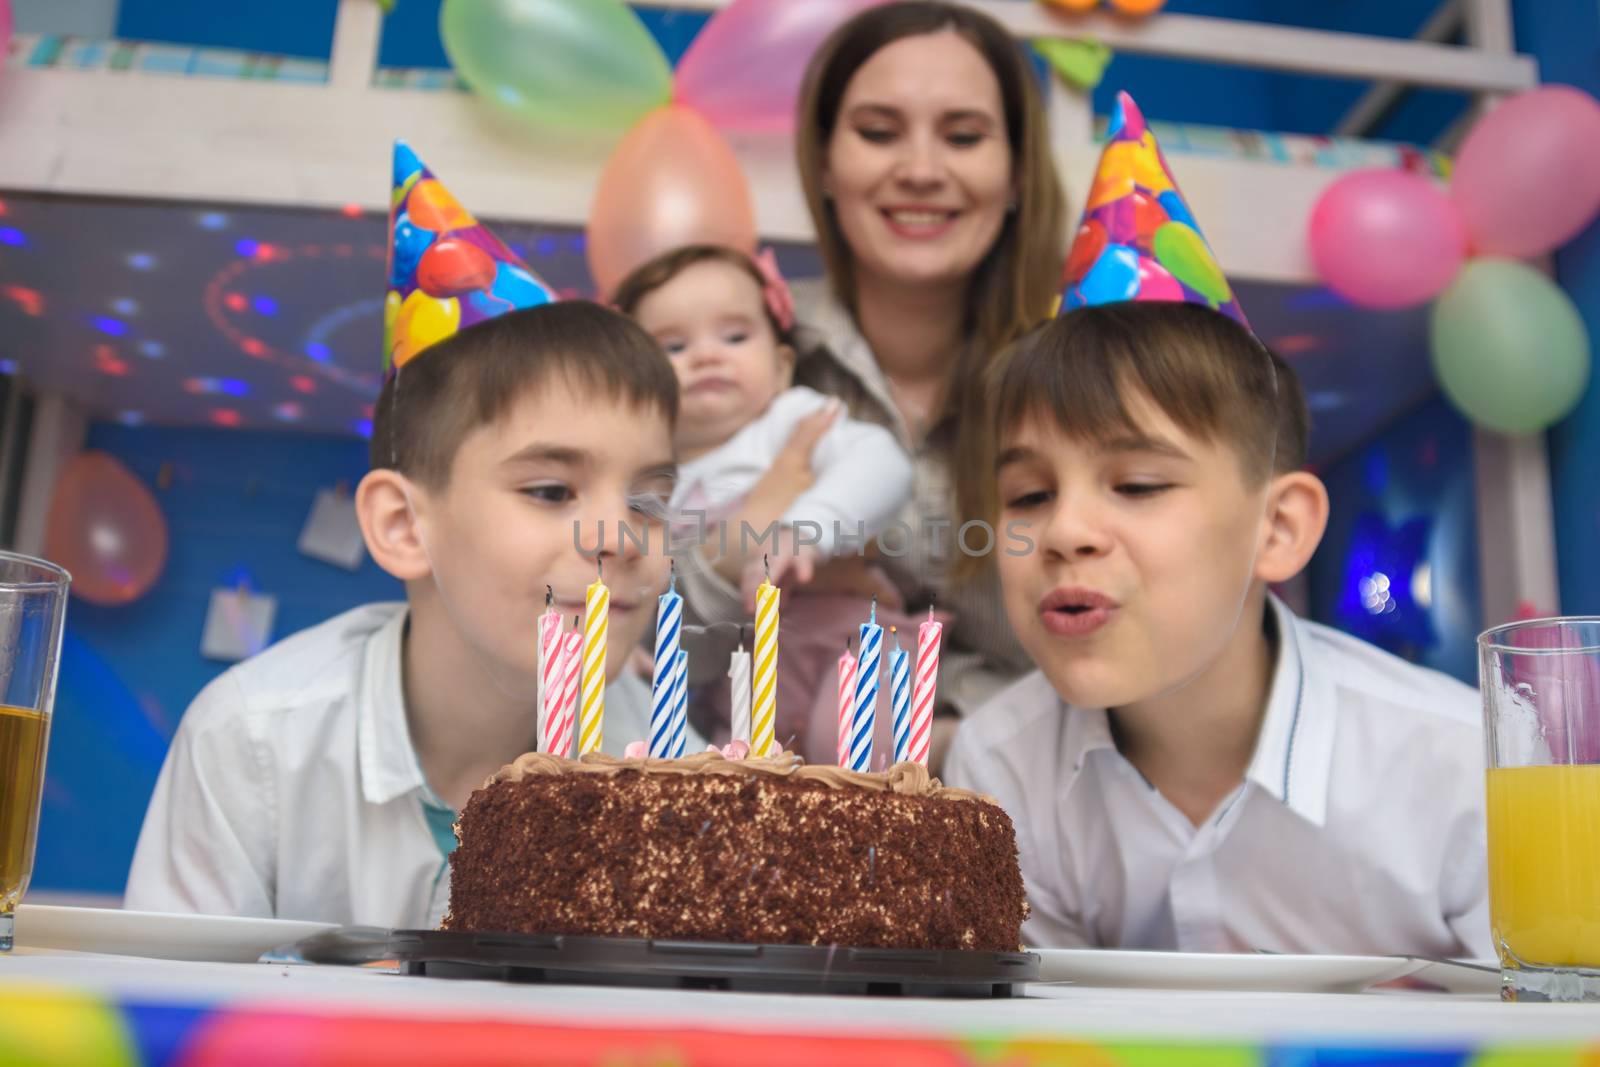 Children blew out candles on a holiday cake